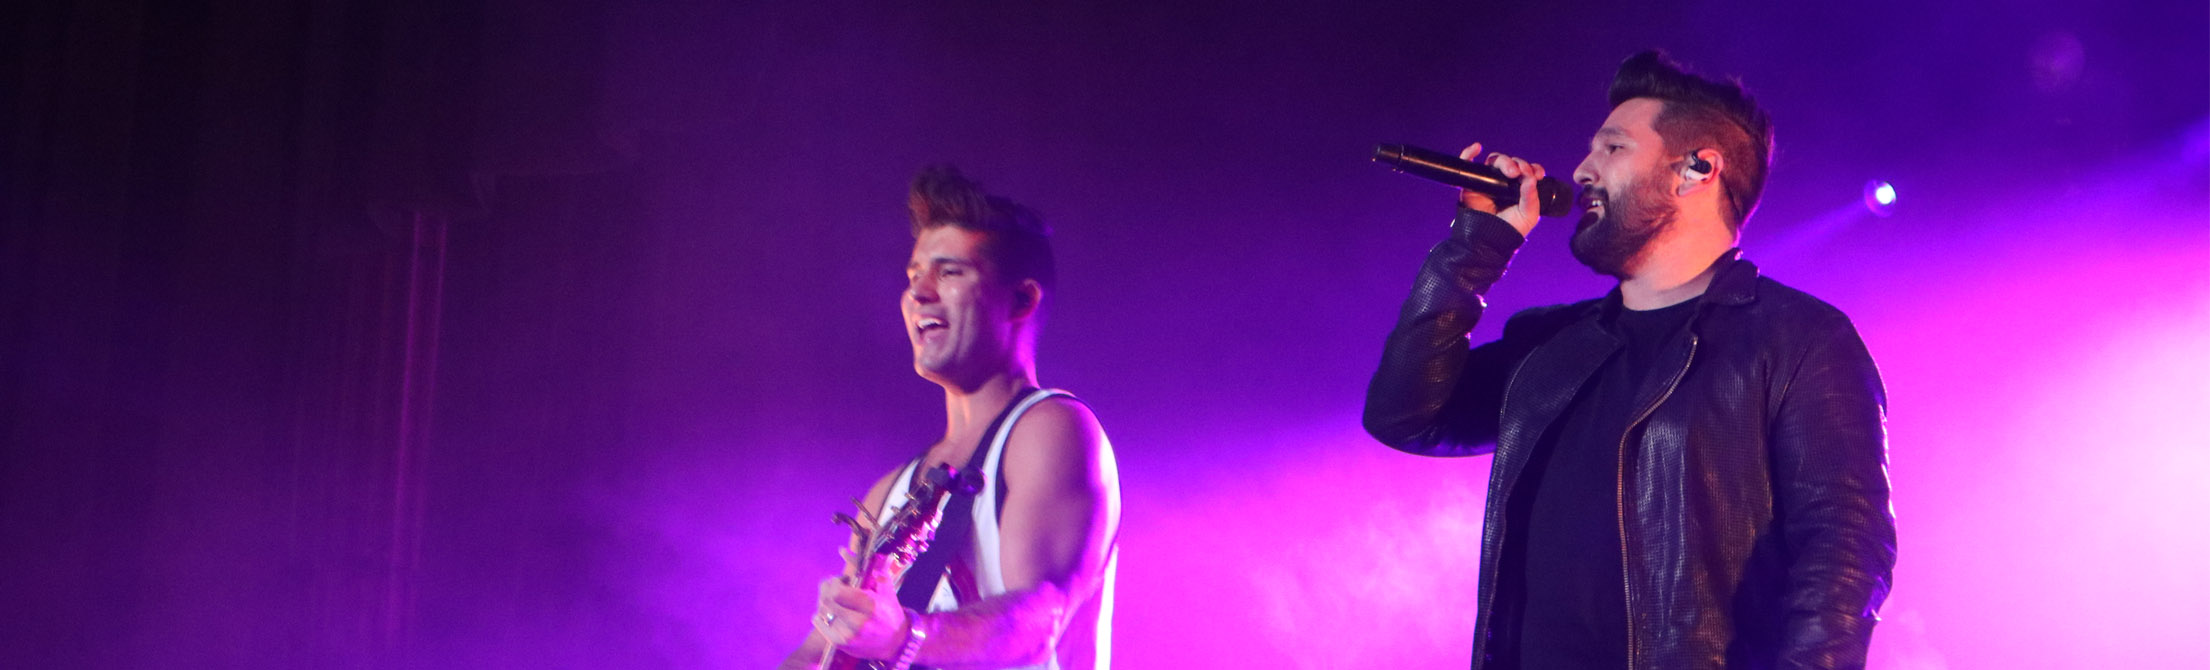 Dan + Shay performing on stage